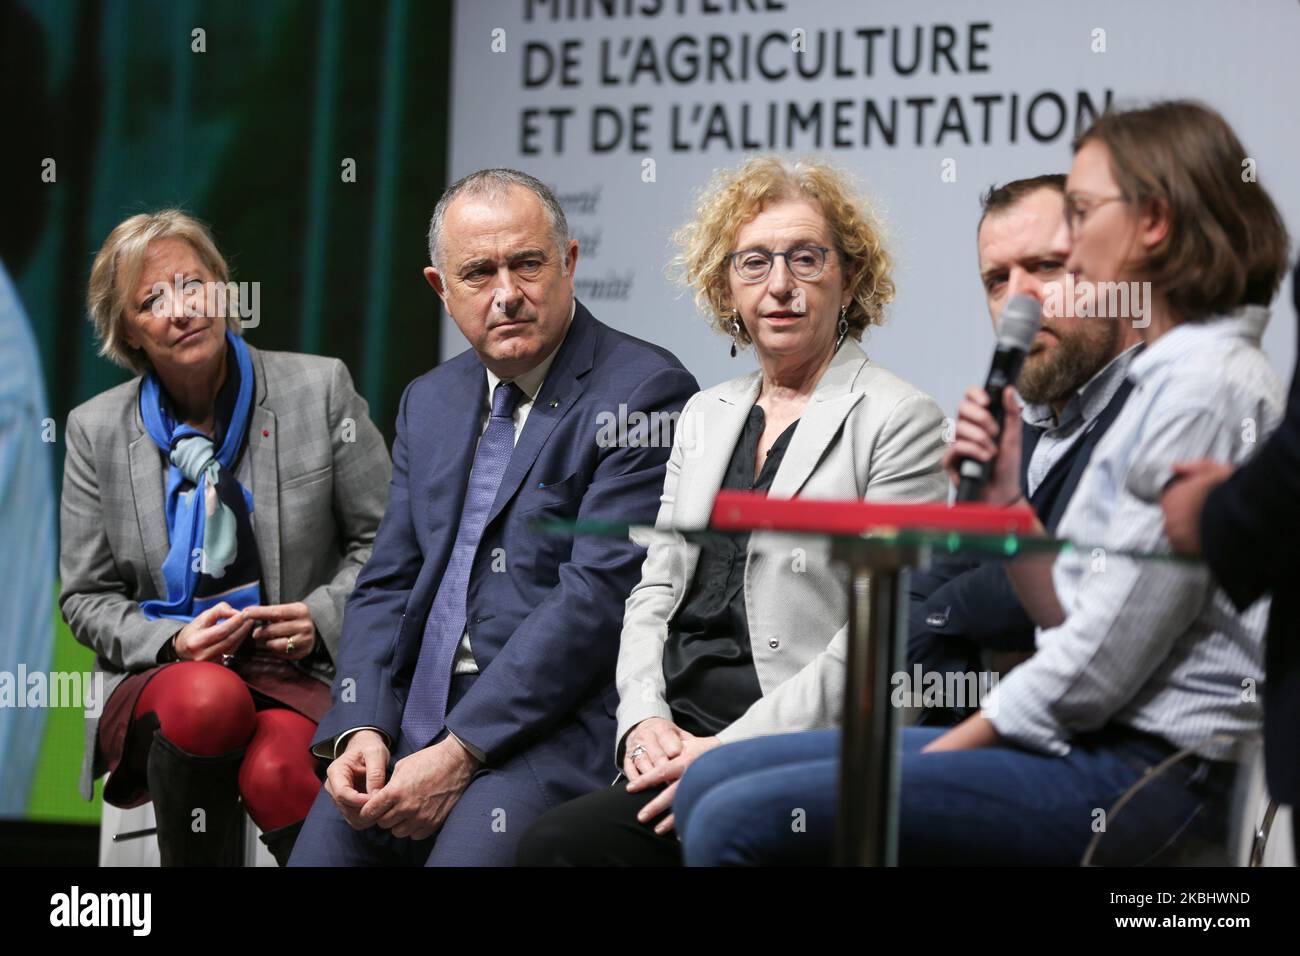 (L to R) French Junior Minister for Disability Issues Sophie Cluzel, Agriculture Minister Didier Guillaume and French Labour Minister Muriel Penicaud take part in a debate during the international Agriculture Fair in Paris on February 25, 2020. (Photo by Michel Stoupak/NurPhoto) Stock Photo